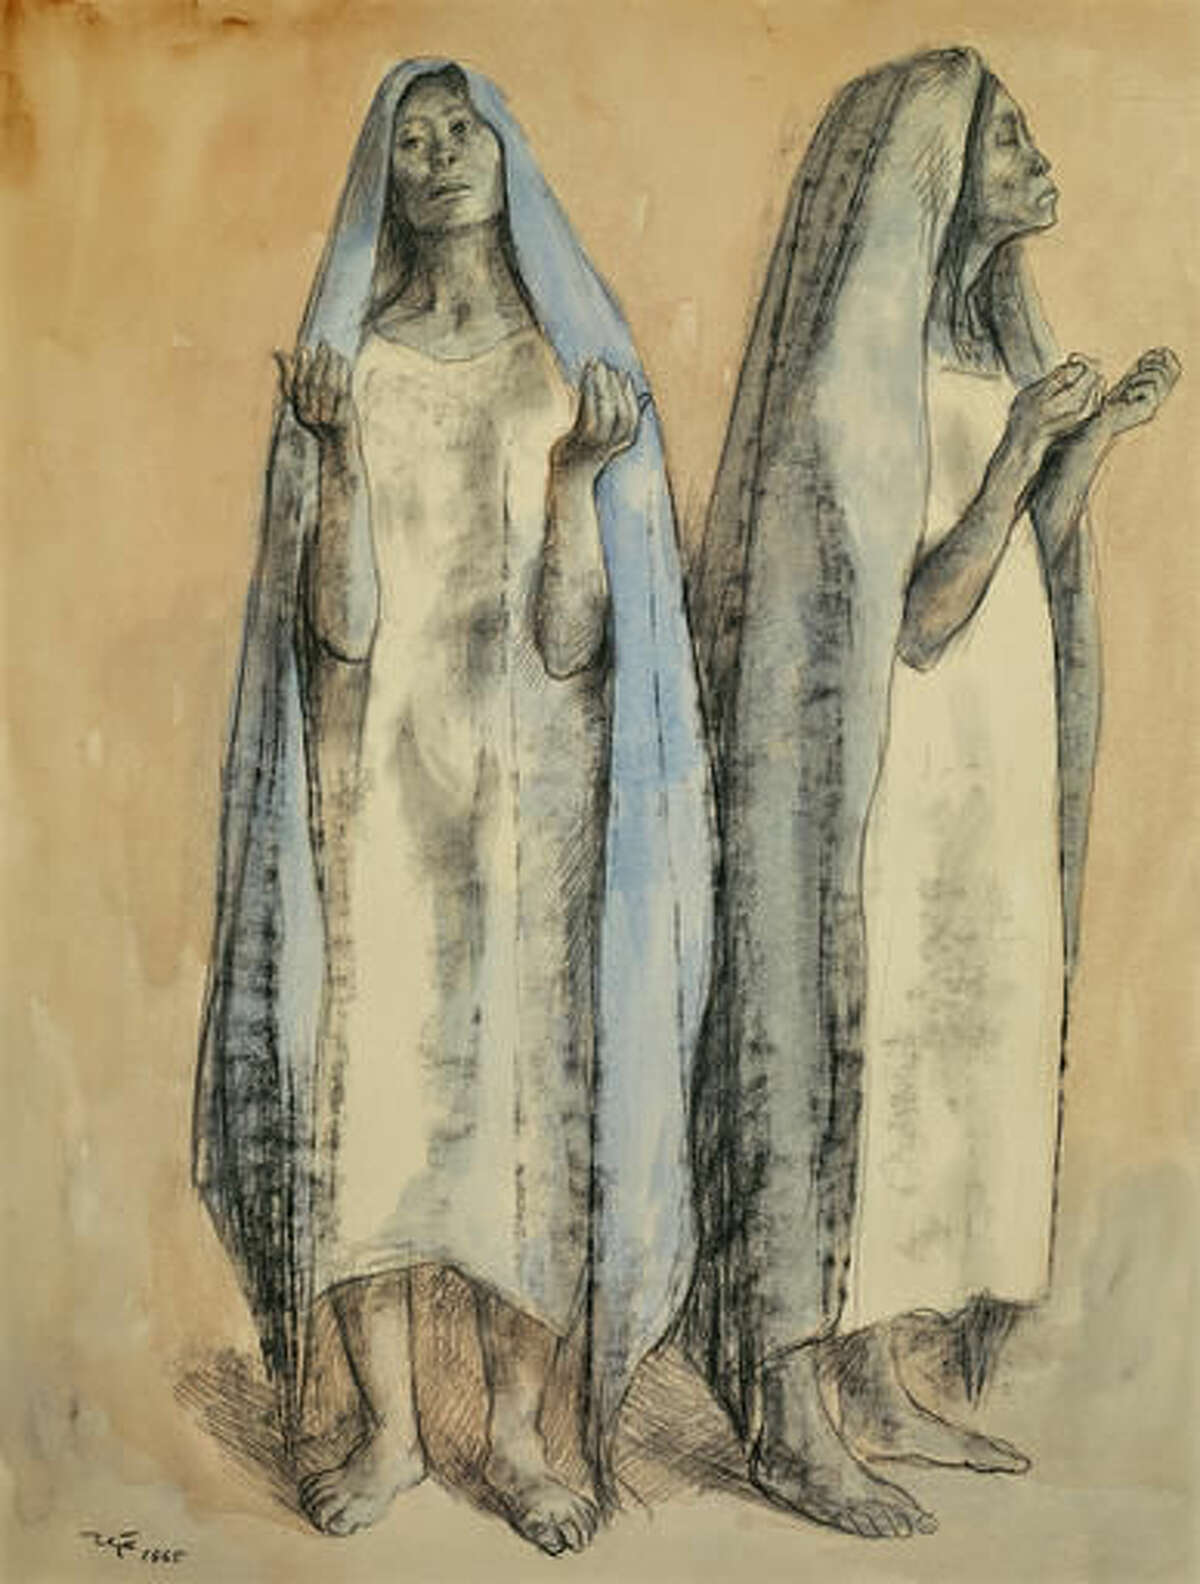 This undated image provided by Objects of Art Santa Fe shows a Francisco Zuniga painting "Two Woman" dated 1929. The 25 x 19 inch pencil and watercolor is from the Garry Shandling collection that will also be on offer at the Objects of Art Santa Fe Show for $15,000. The artwork is part of dozens of paintings and other works of art from the estate of Shandling that will be offered for sale at an art show in New Mexico this week. (Objects of Art Santa Fe via AP)